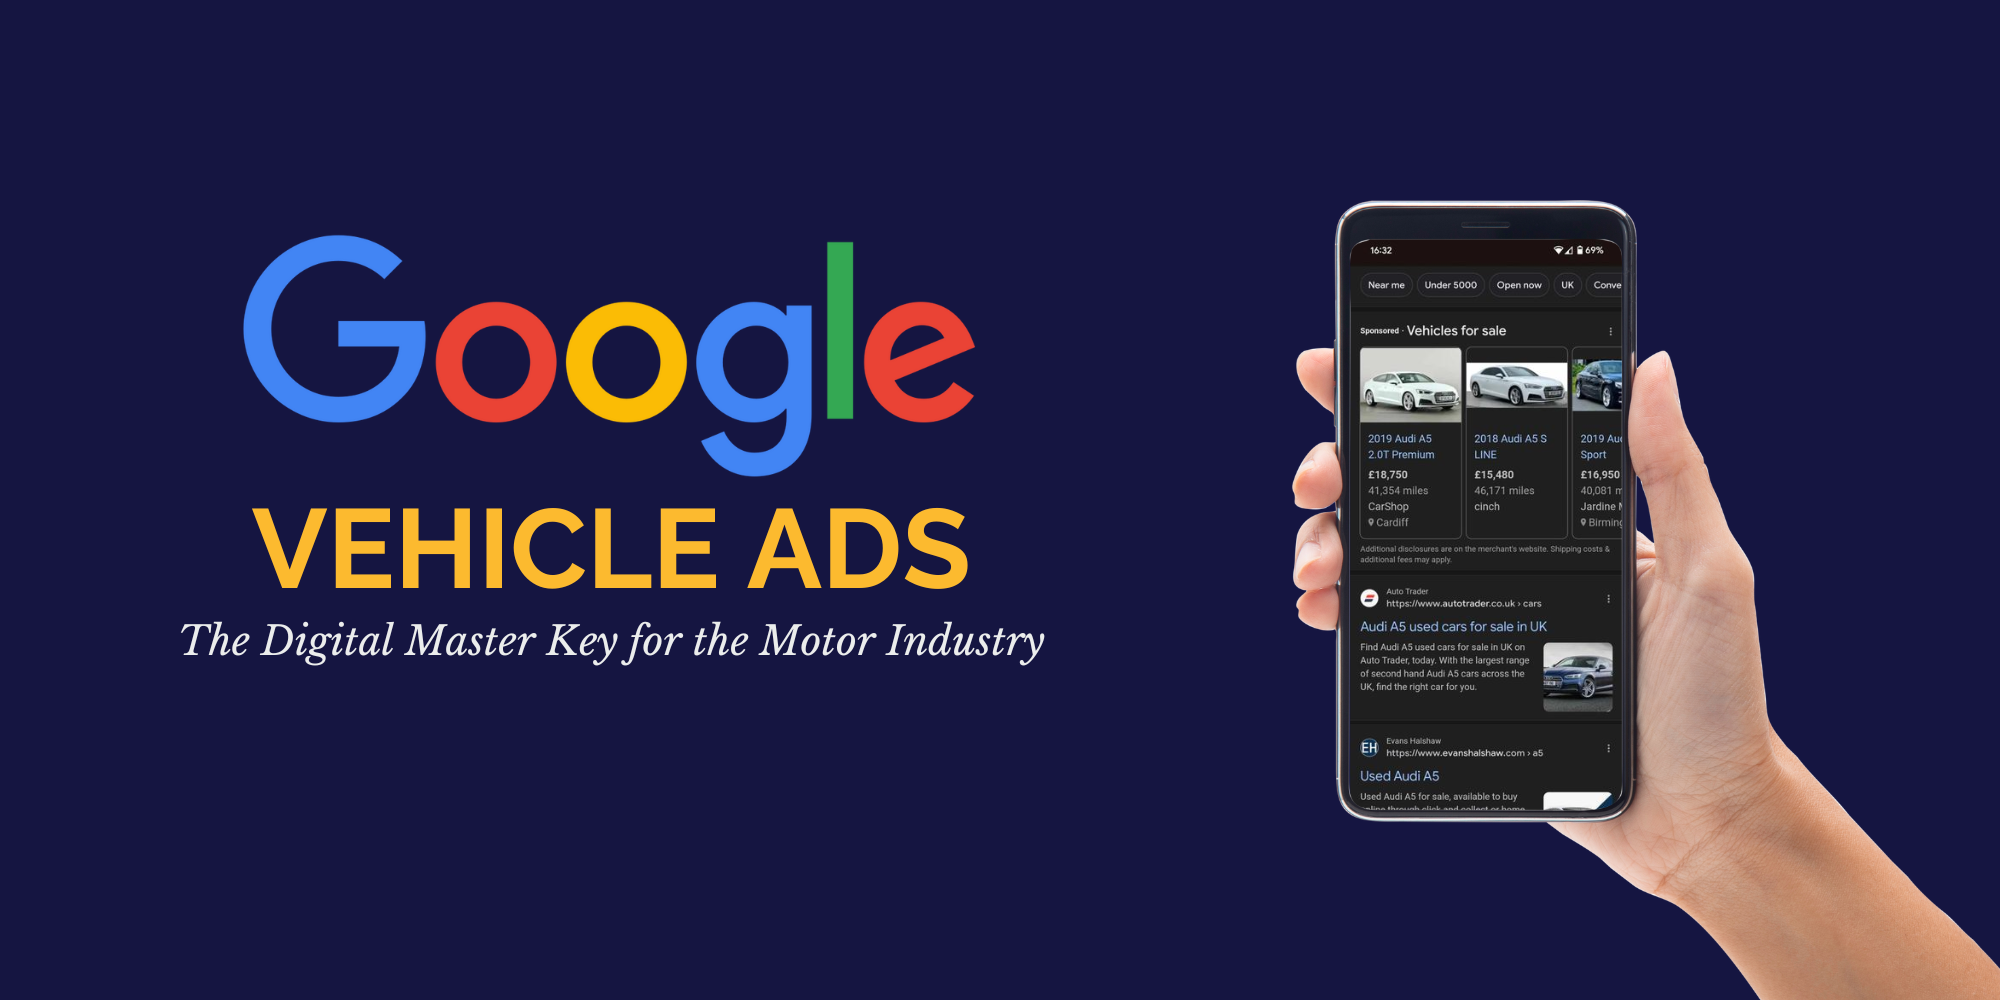 Google Vehicle Ads: The Digital Master Key for the Motor Industry